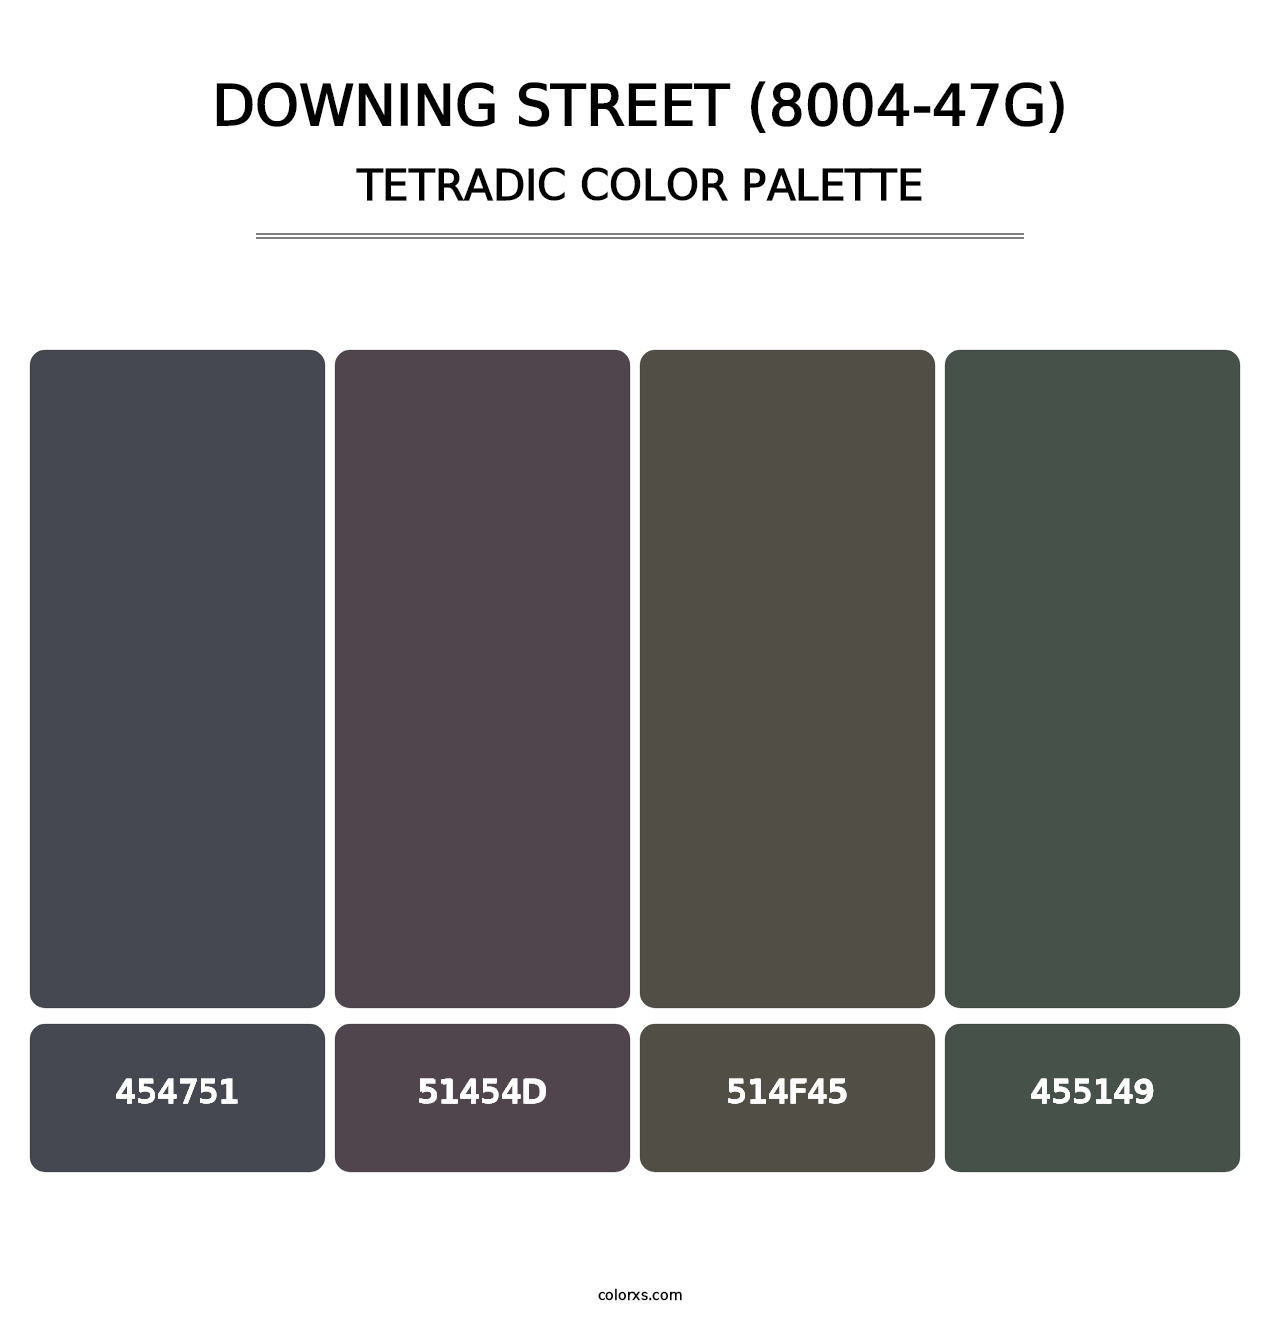 Downing Street (8004-47G) - Tetradic Color Palette